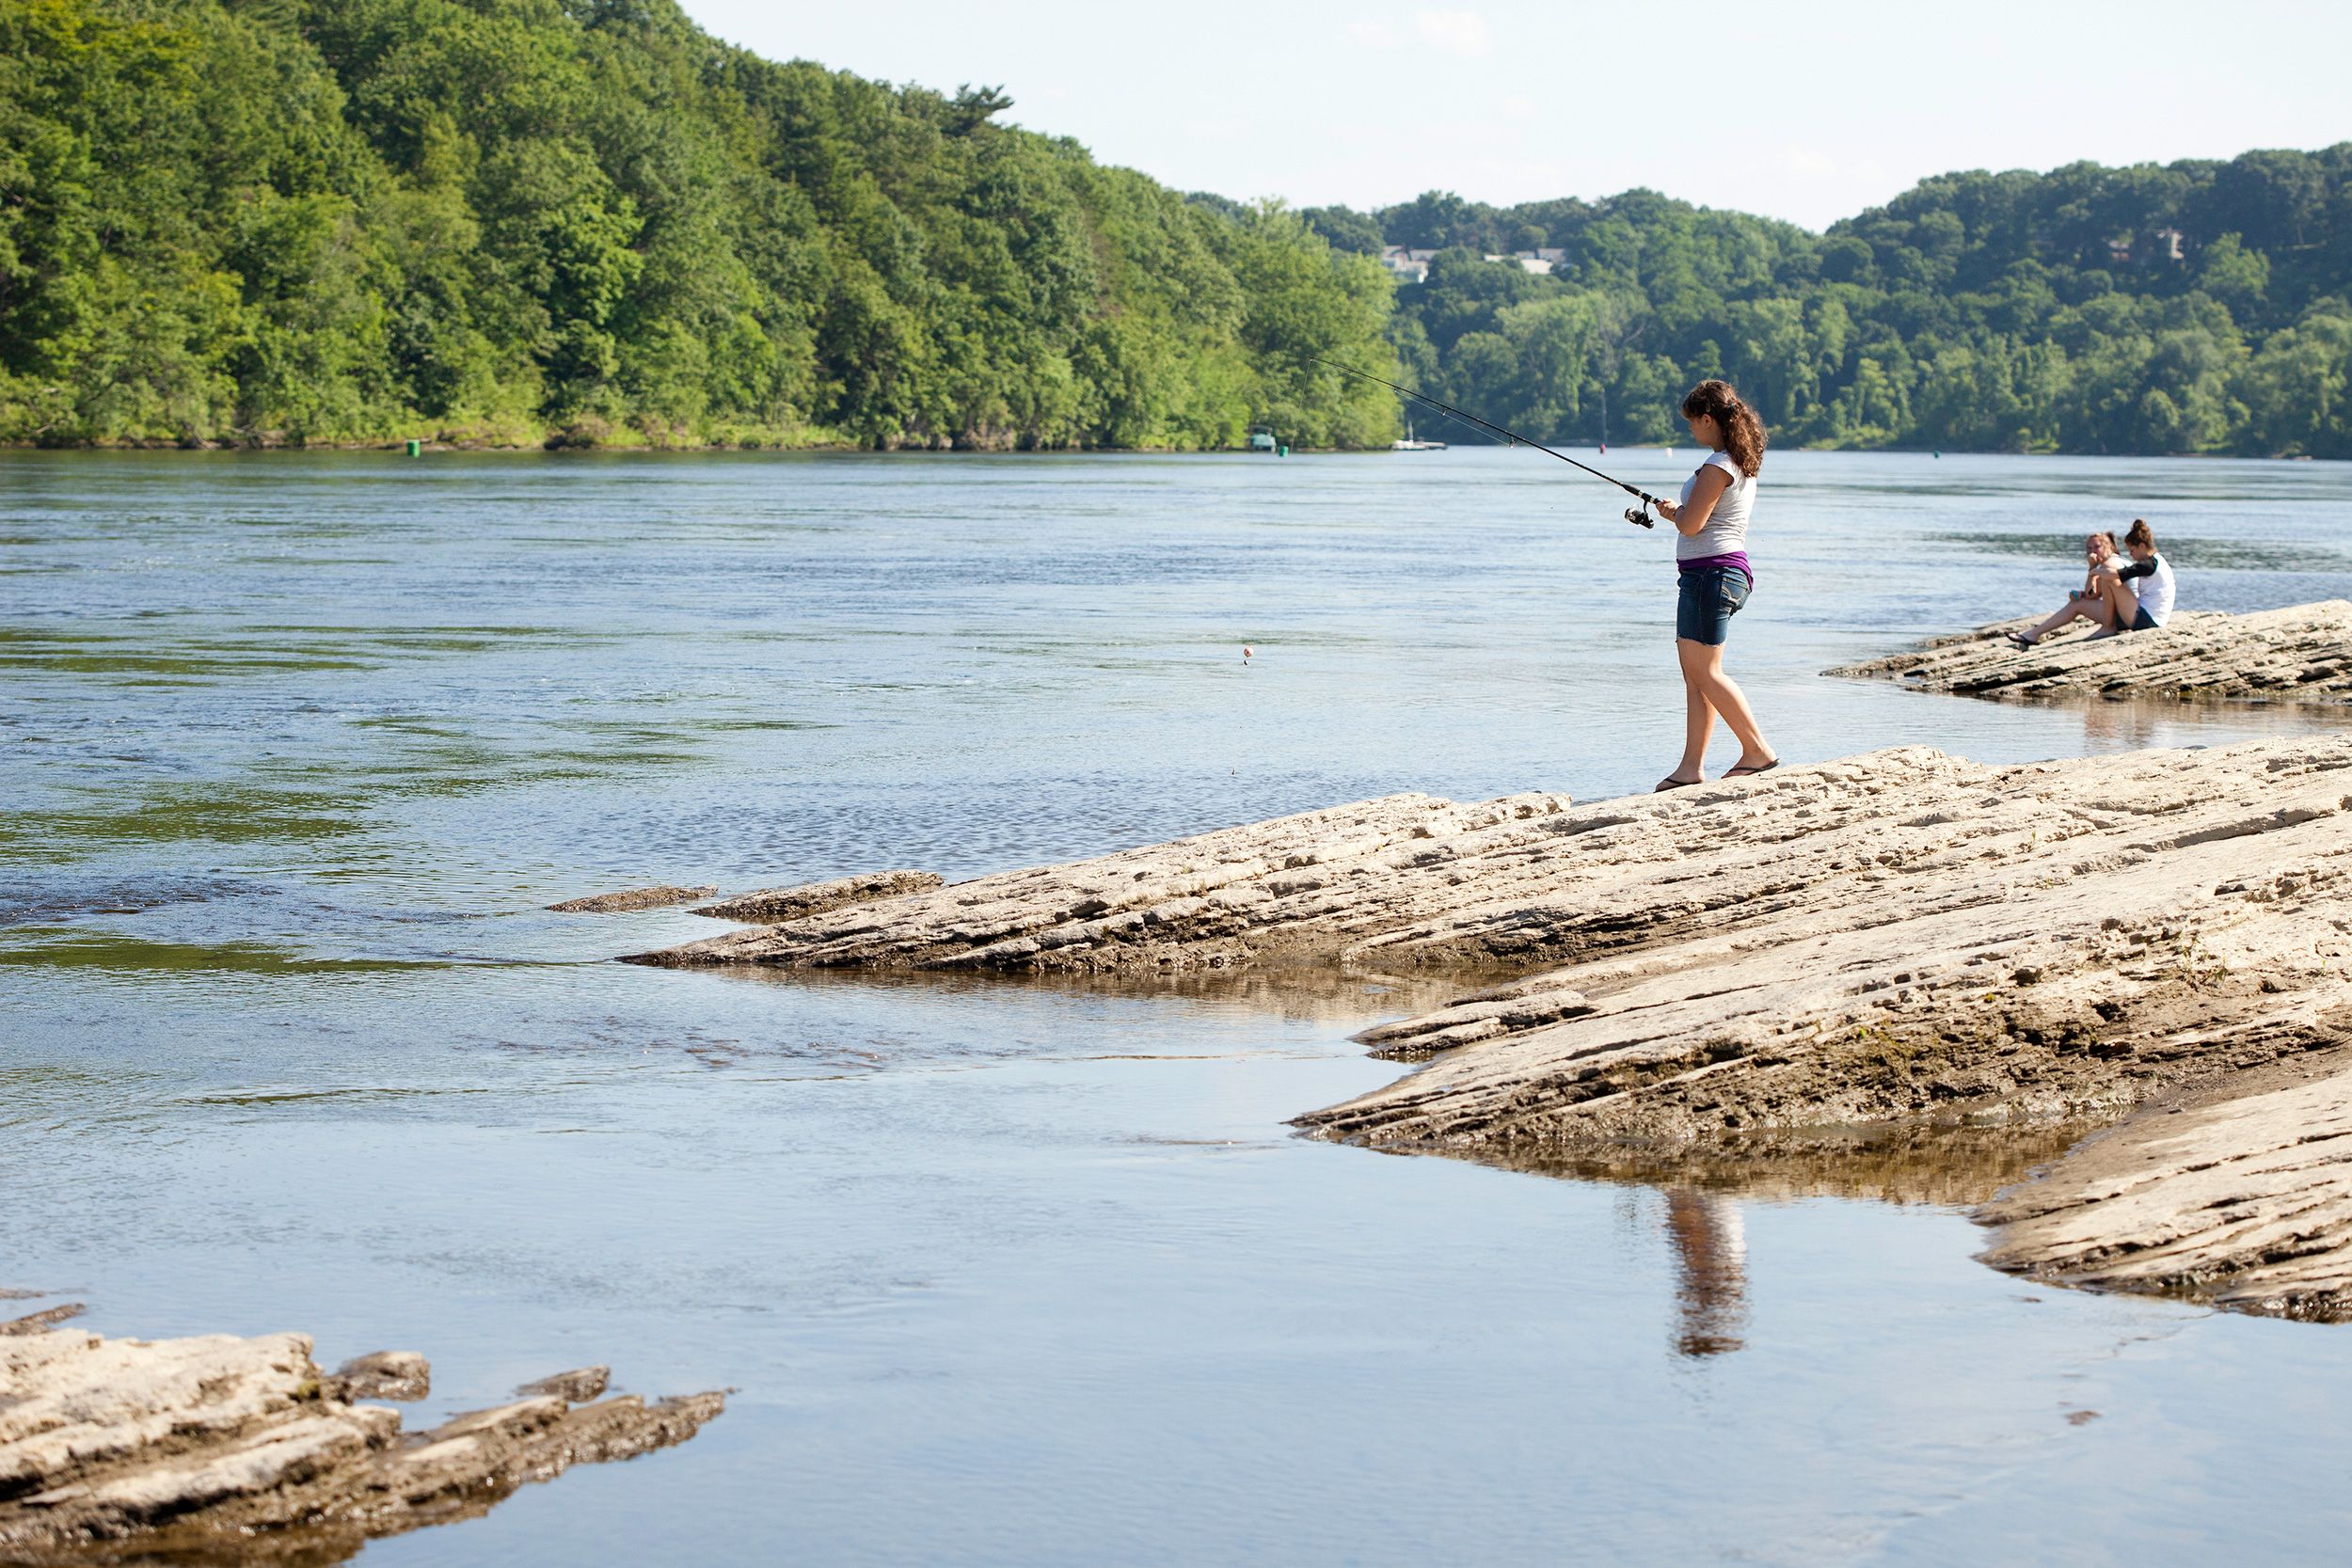 Some of the best fishing in Western MA can be discovered on the Connecticut River.